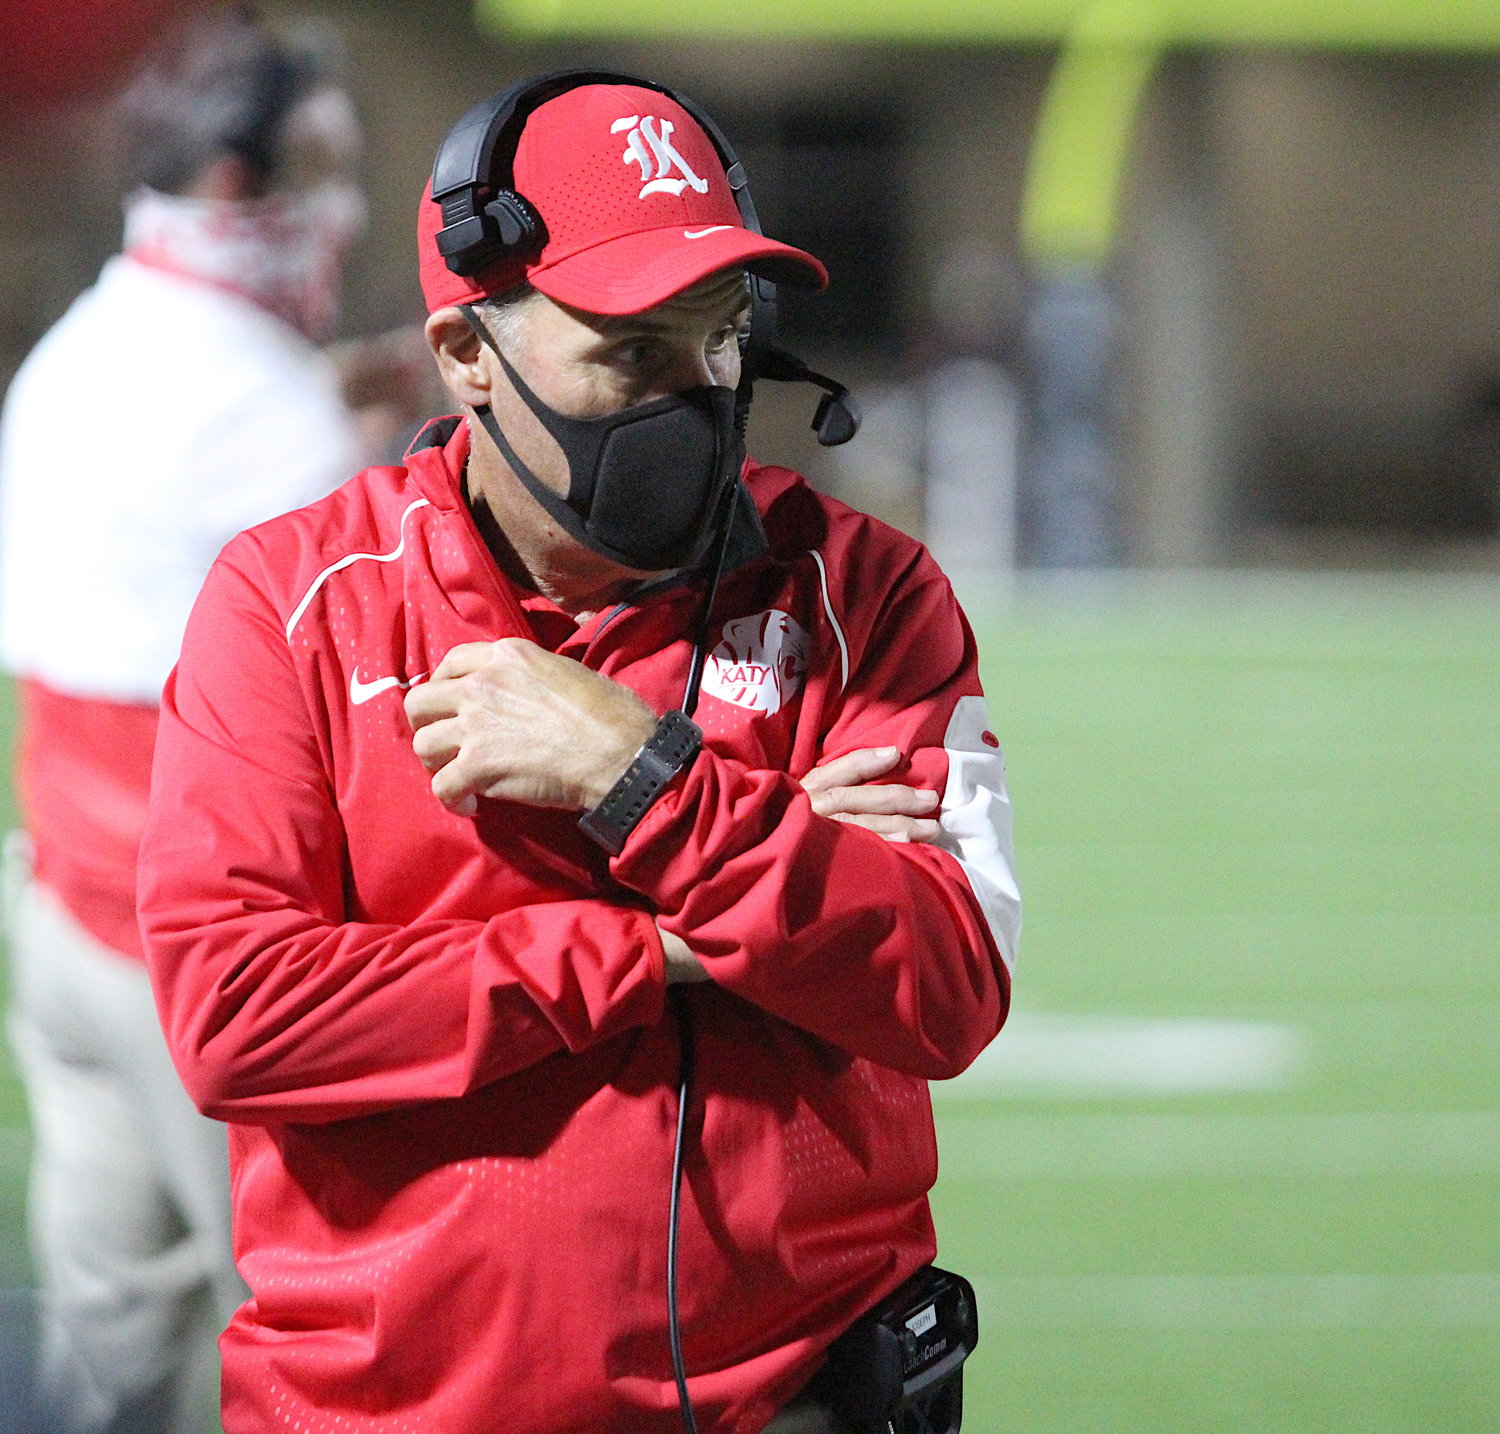 Katy coach Gary Joseph looks on during Thursday's game against Tompkins at Legacy Stadium. The Tigers' 24-19 loss snapped a 75-game district winning streak.